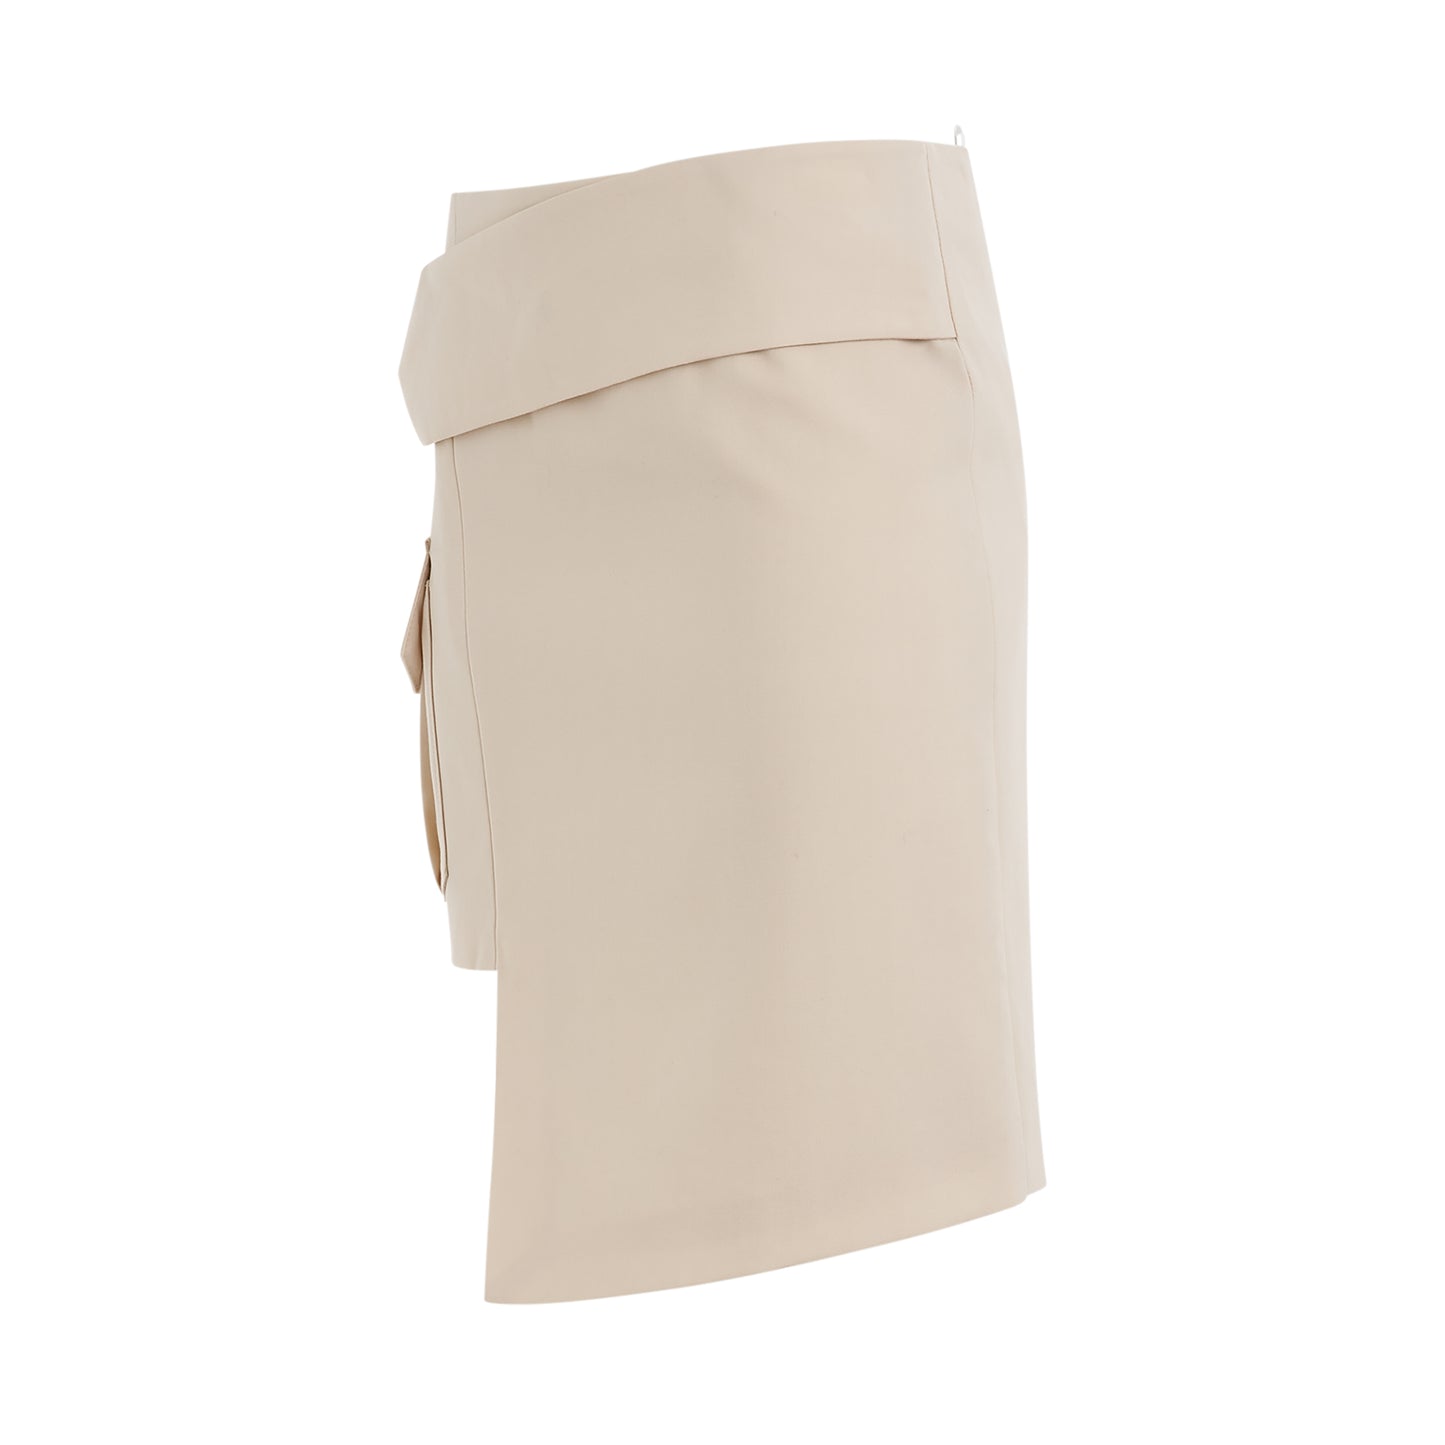 Toybox Dry Wool Pocket Skirt in Sand